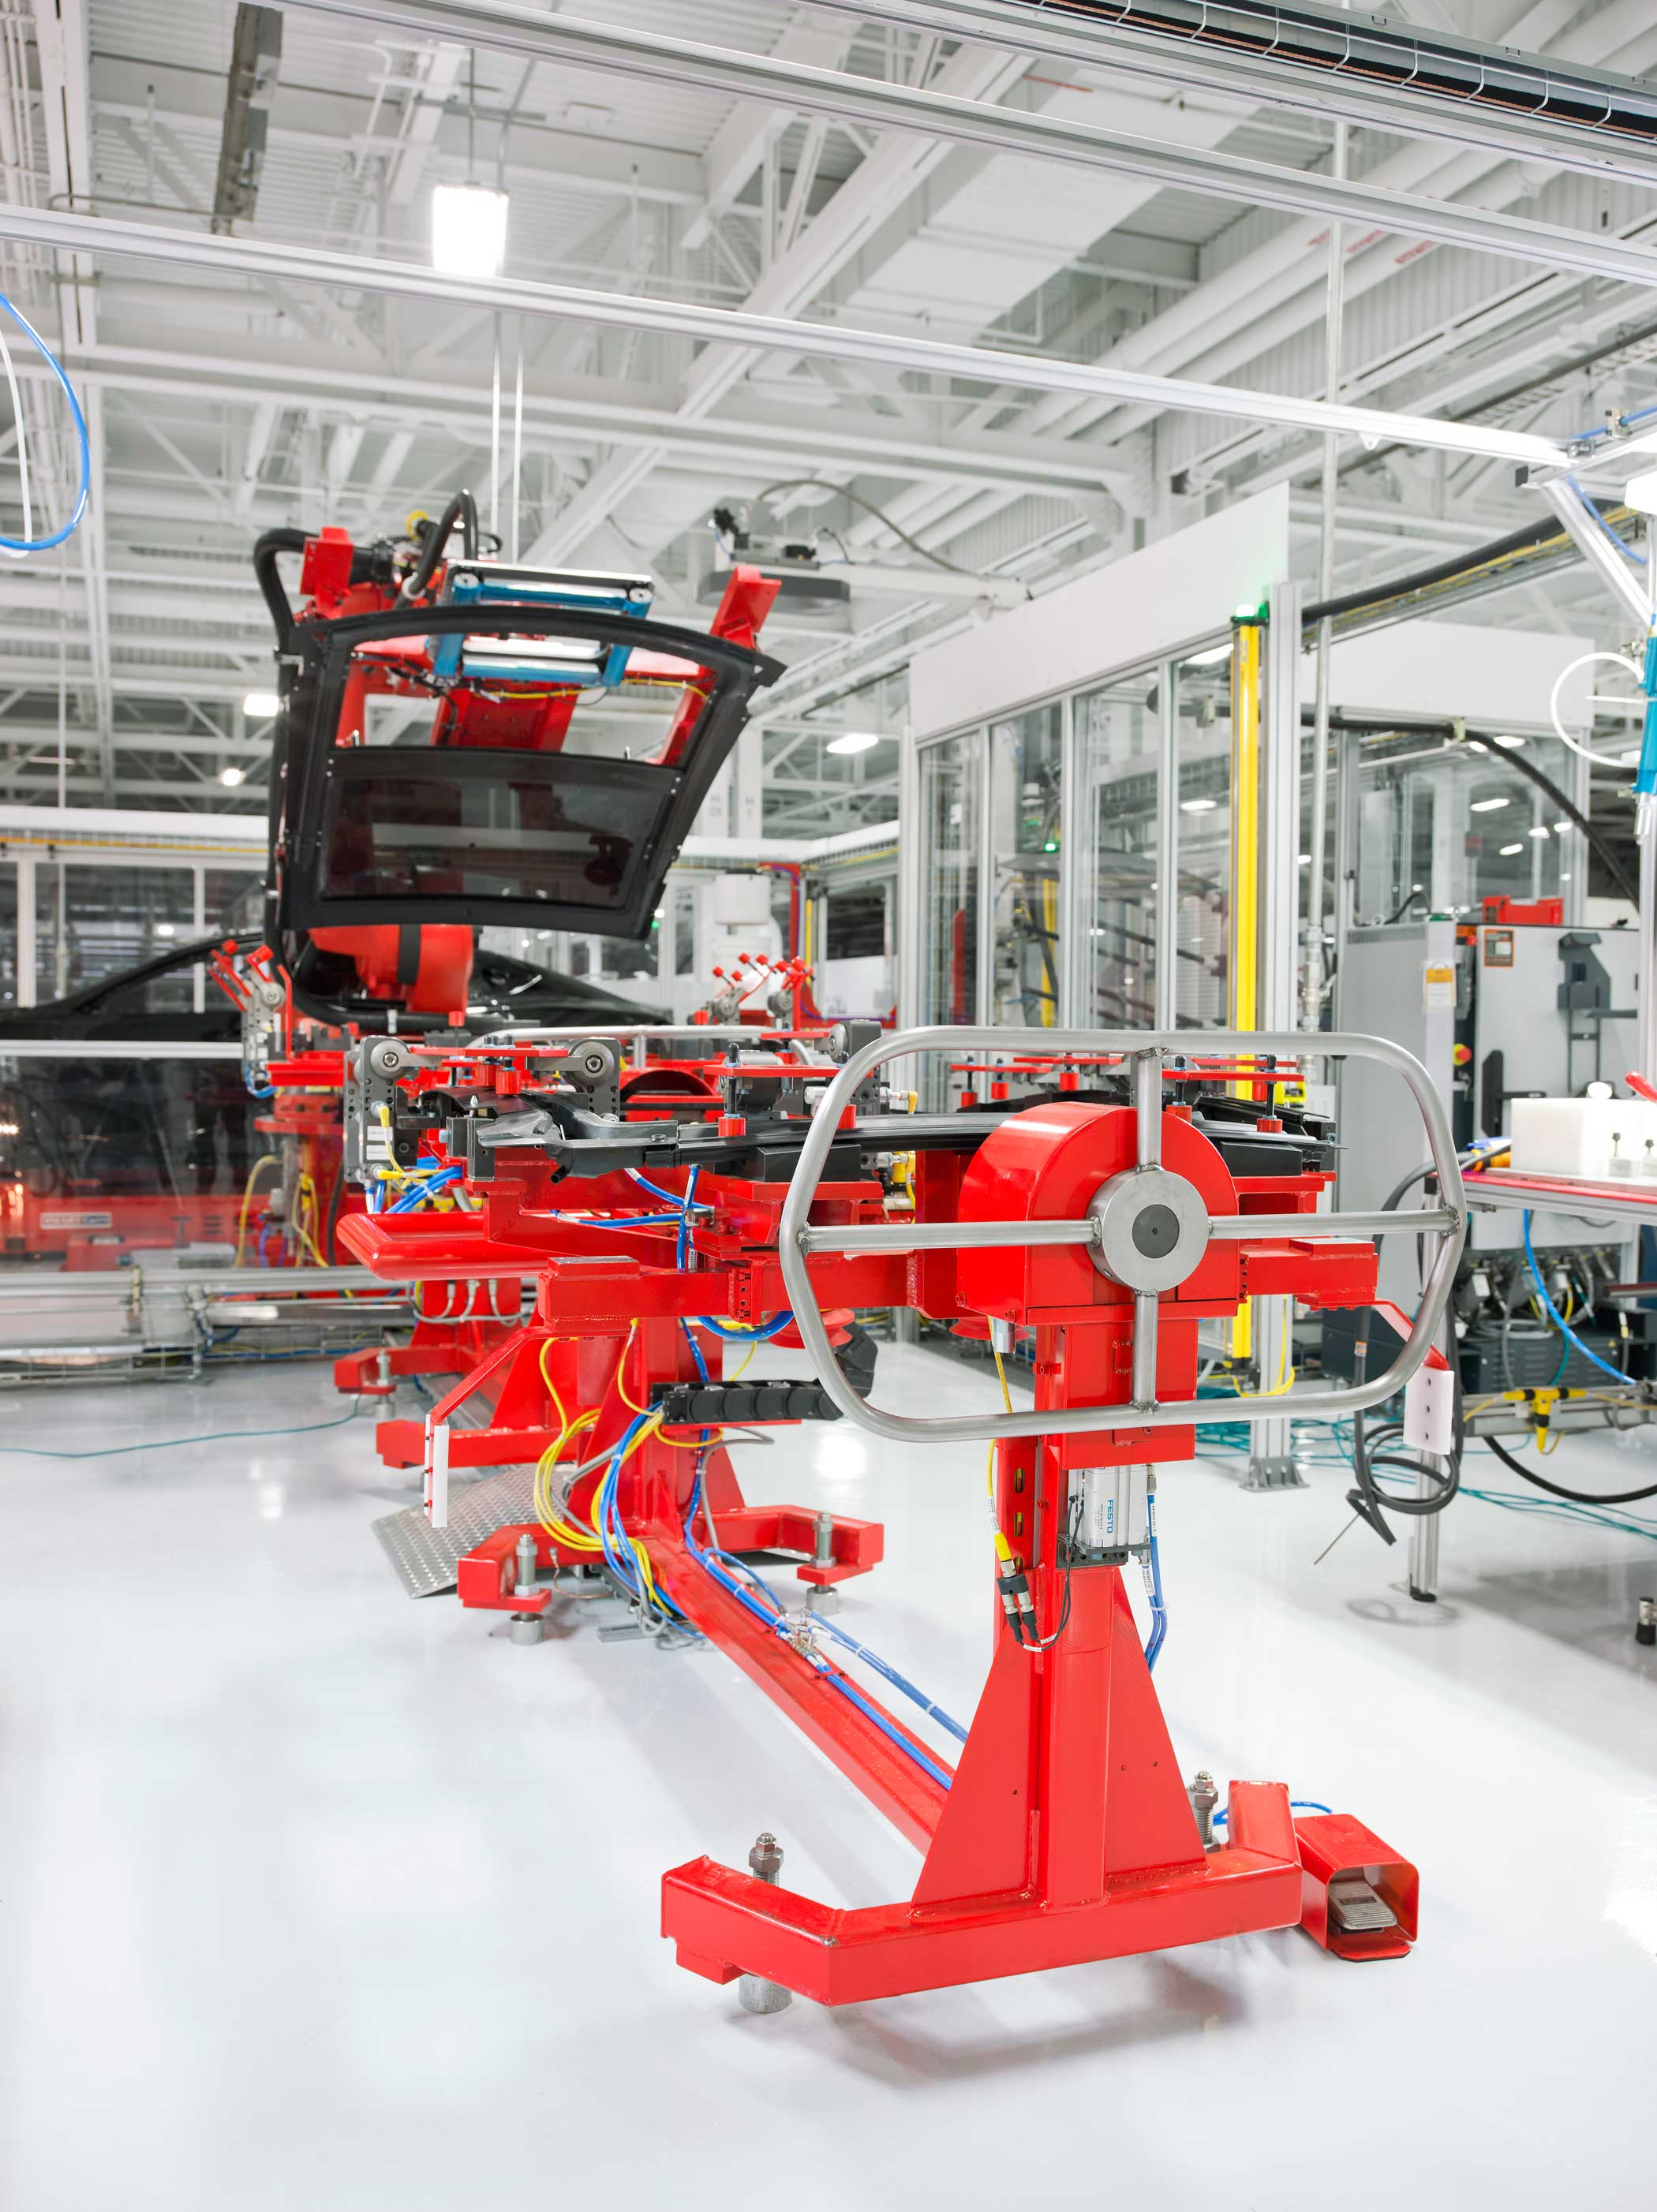 A machine used on the assembly line at the Tesla Factory in Fremont, Calif.